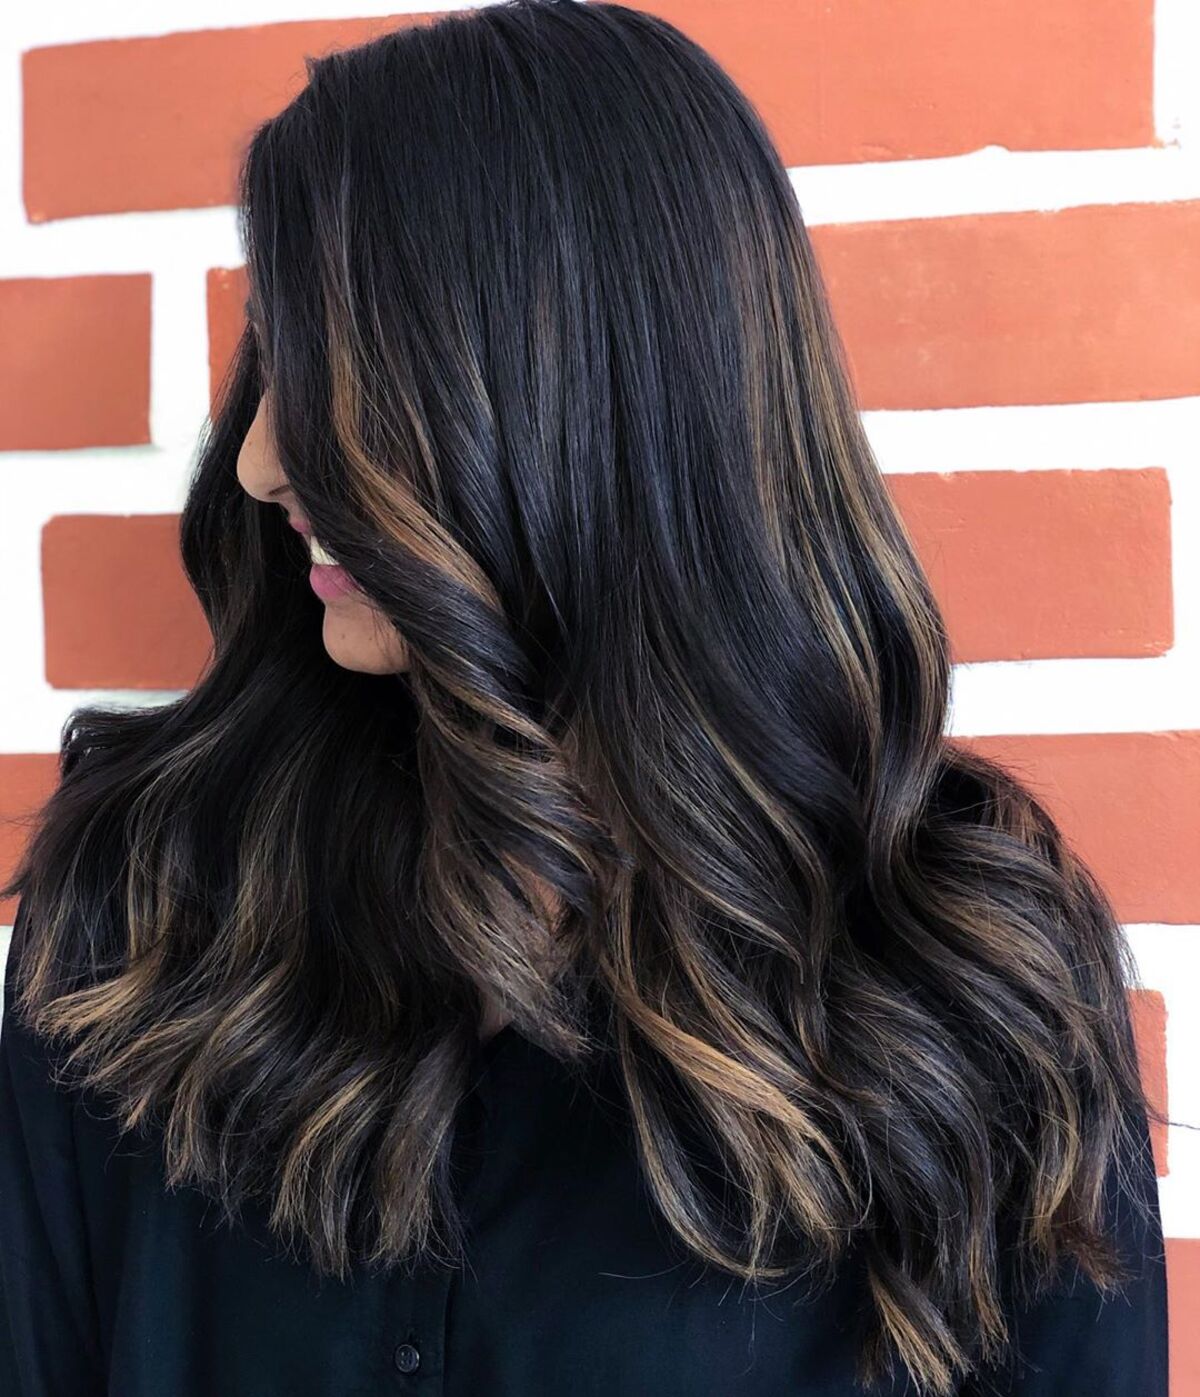 23 Prettiest Ways to Get Rose Gold Highlights for Every Hair Color